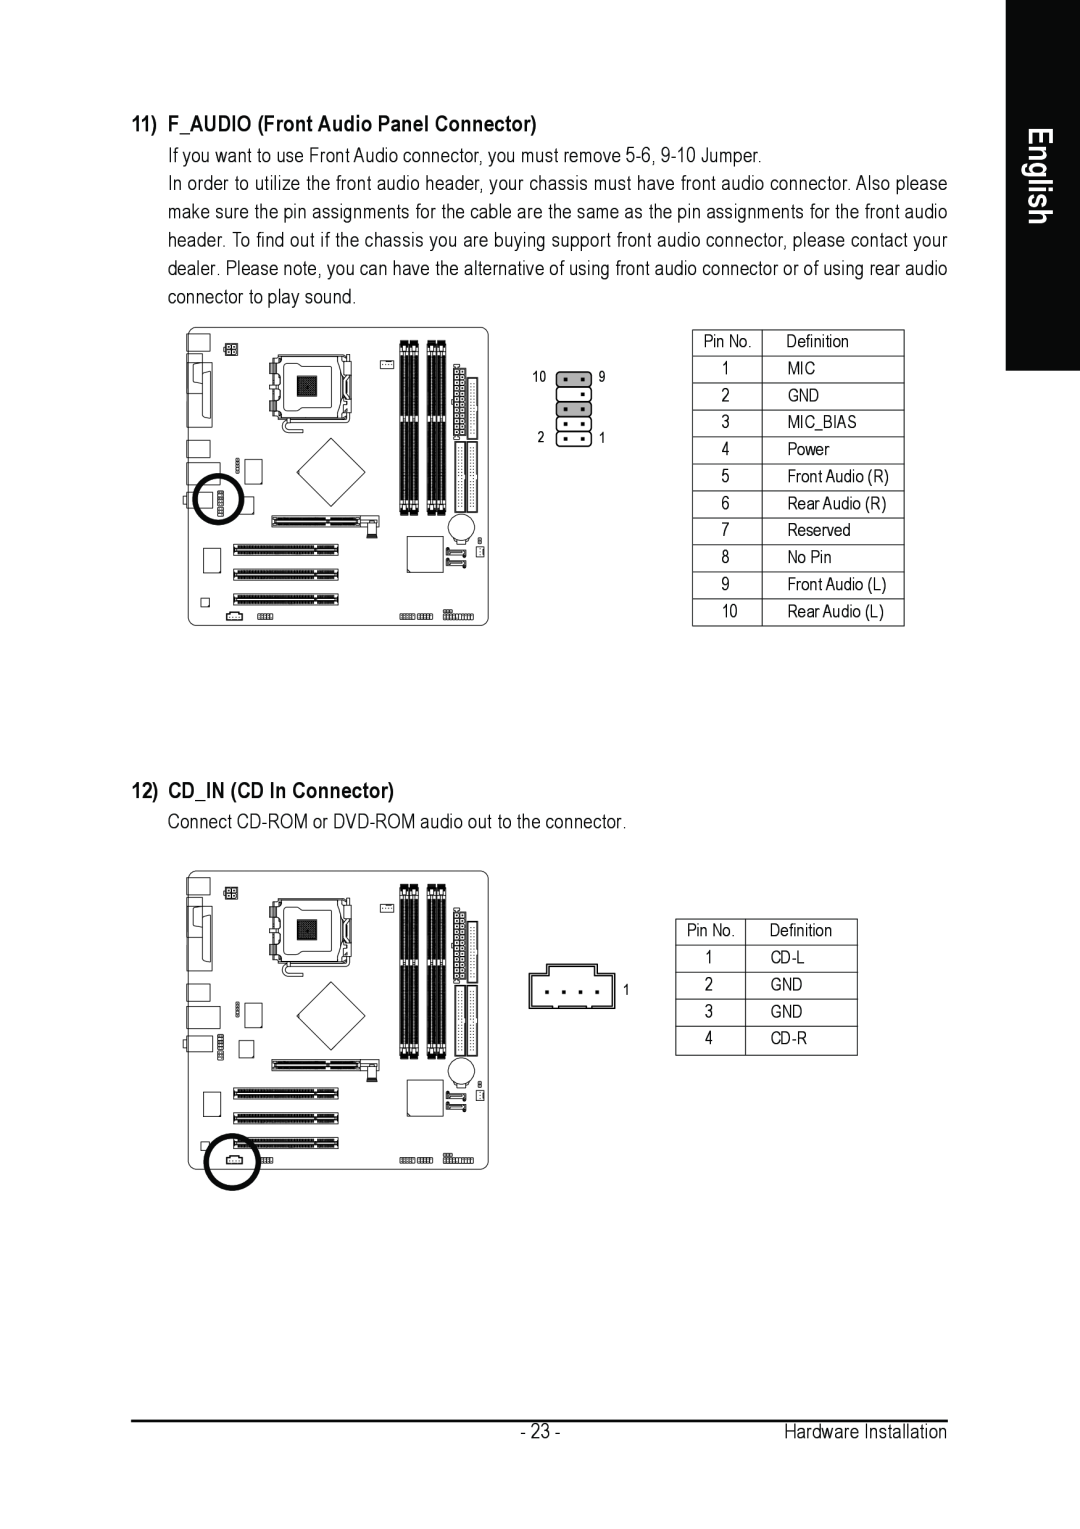 Gigabyte GA-8I865PEM-775 user manual FAUDIO Front Audio Panel Connector, CDIN CD In Connector, English 